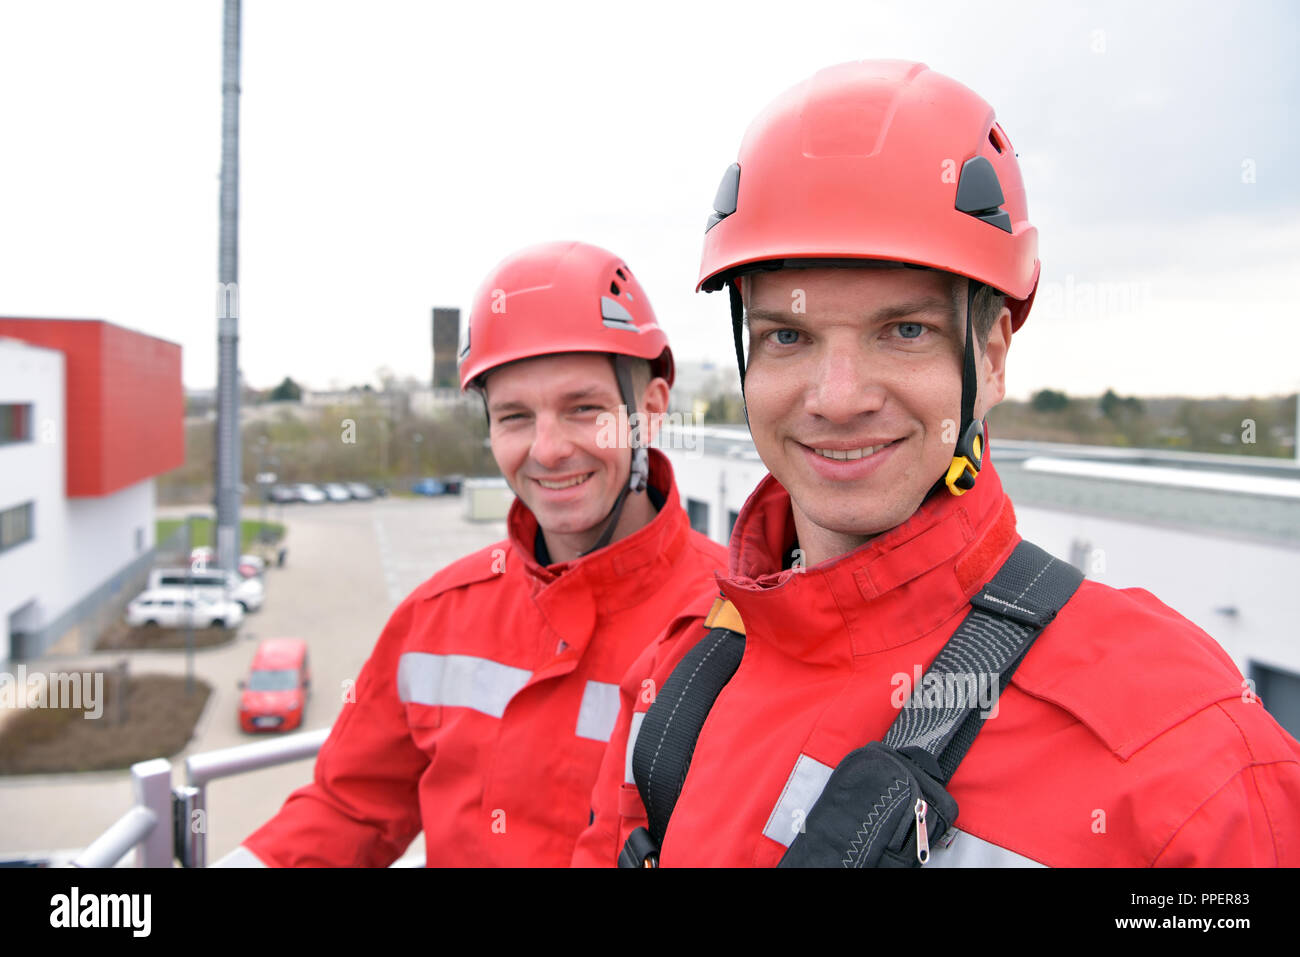 training in altitude rescue at the fire brigade - emergency operation with a crane trolley and abseiling Stock Photo